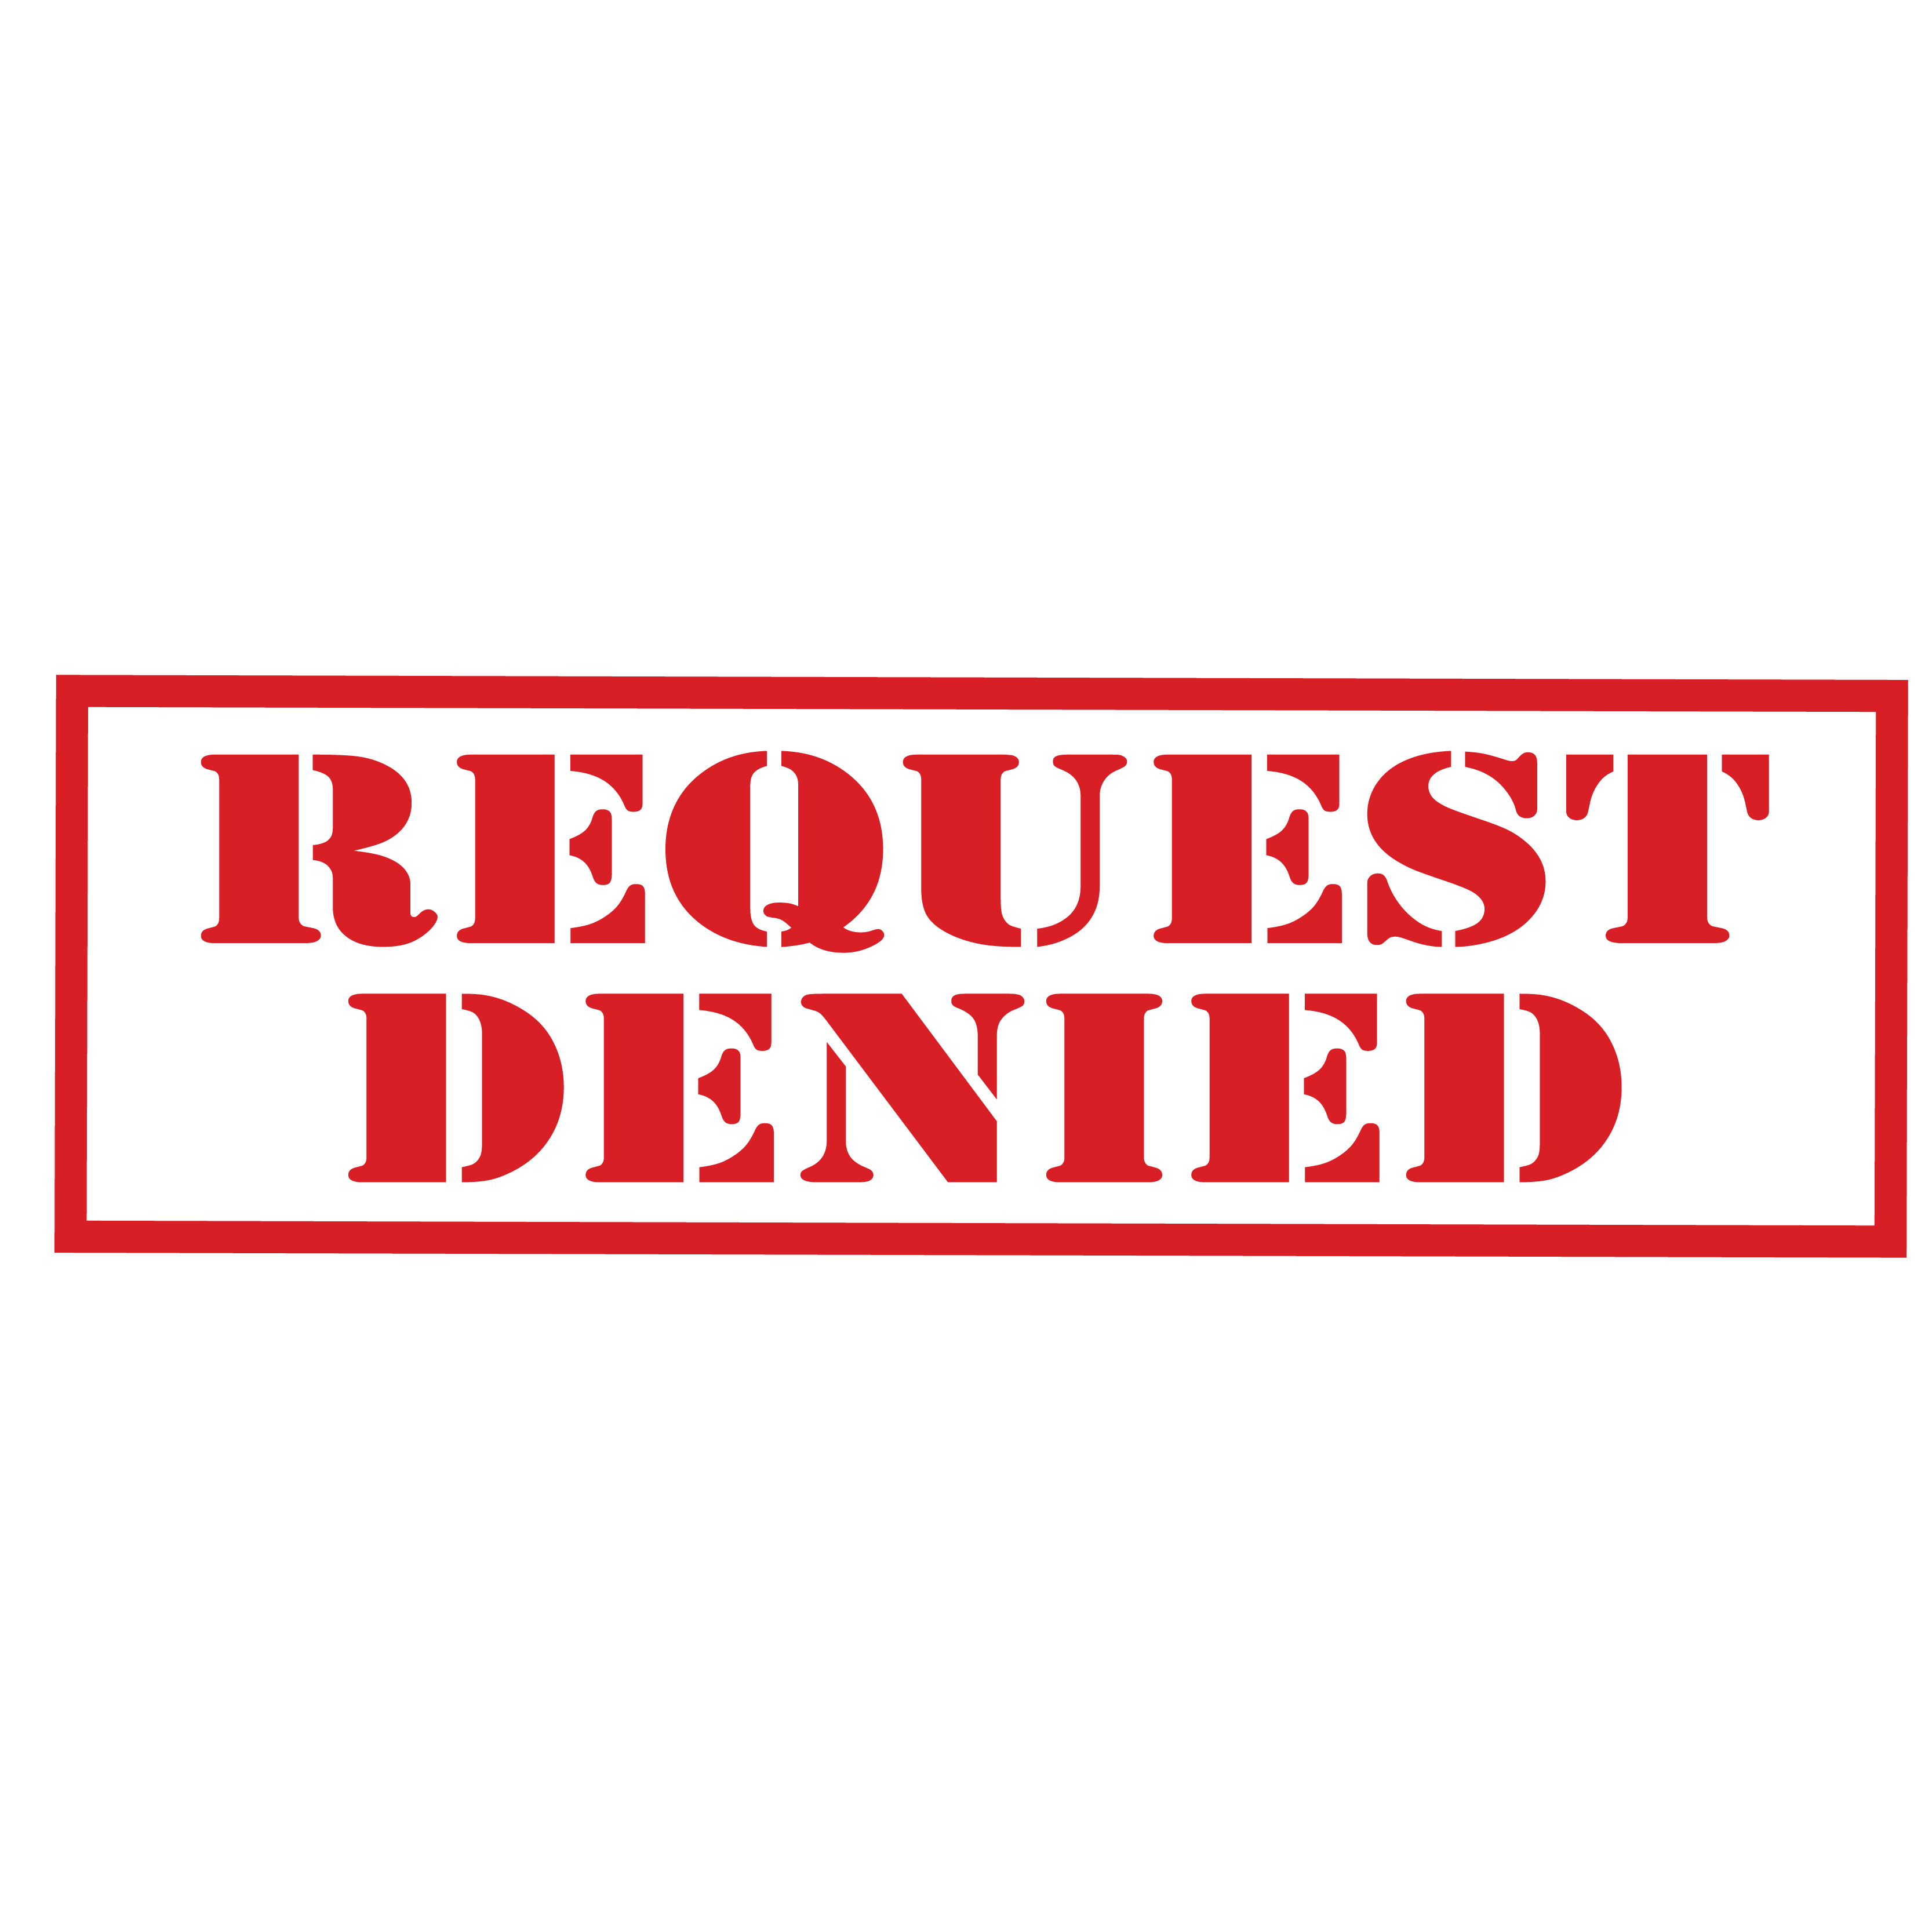 Denied Stamp PNG HD Quality